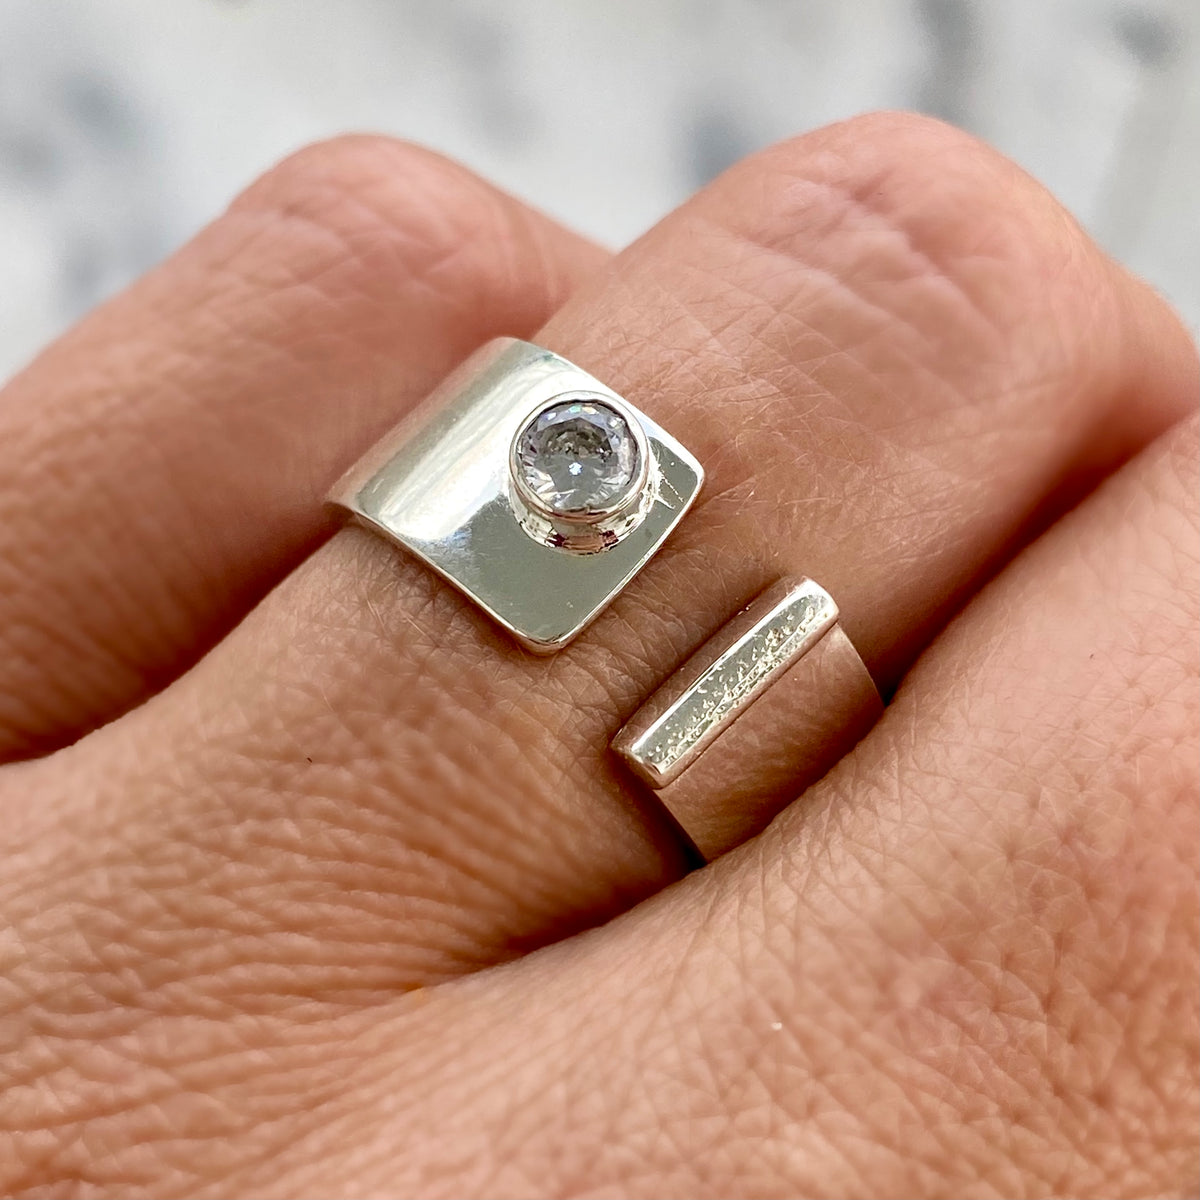 Silver ring with zircon gemstone, adjustable ring